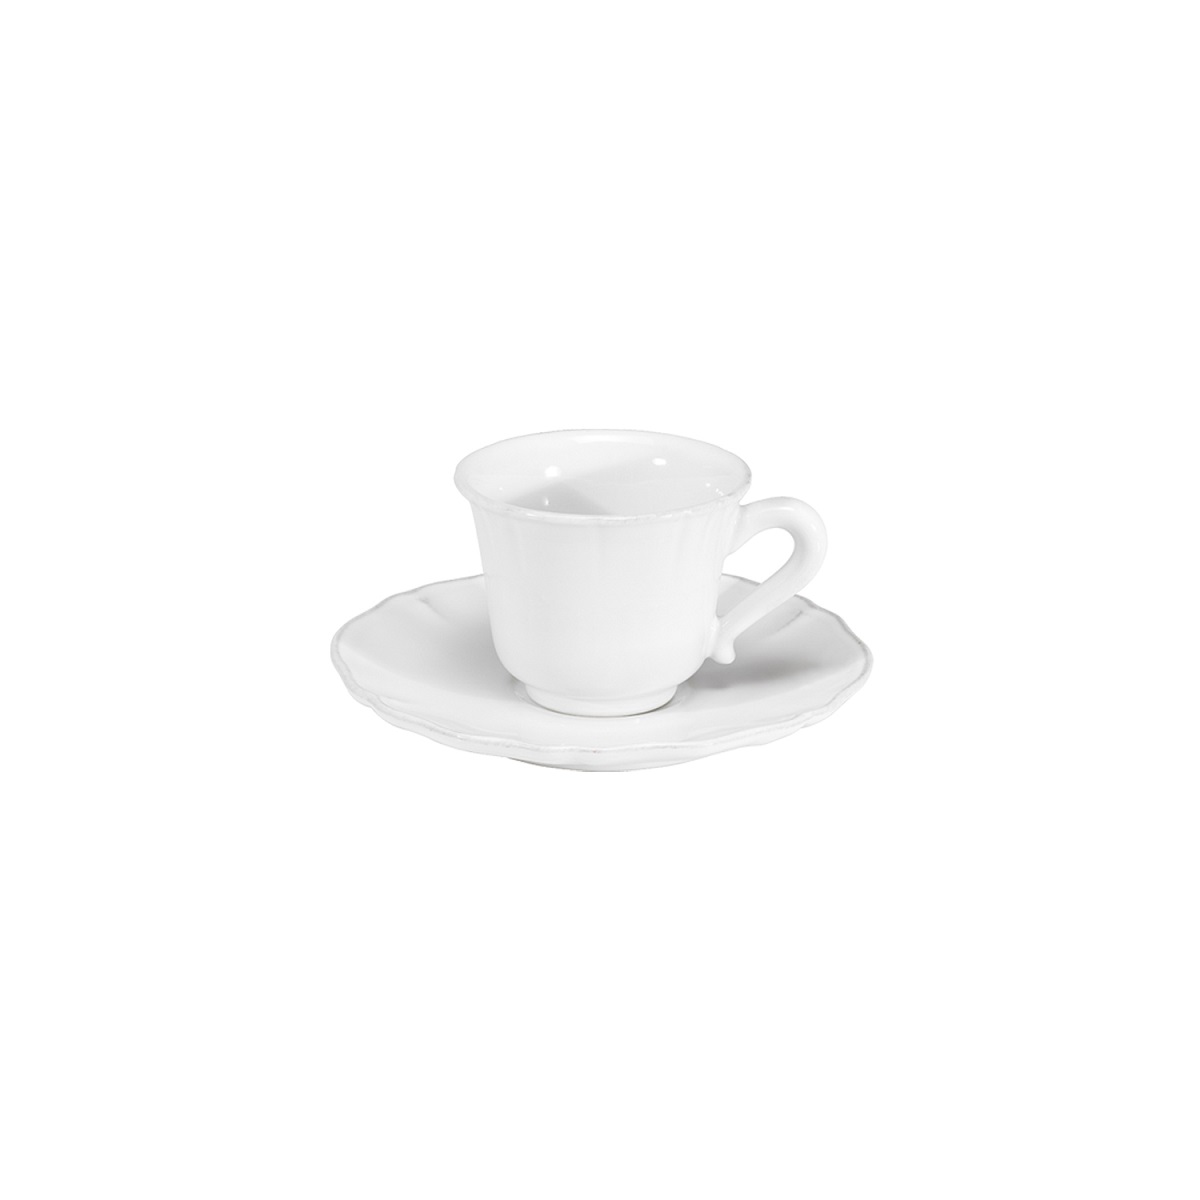 Alentejo White Coffee Cup & Saucer Gift